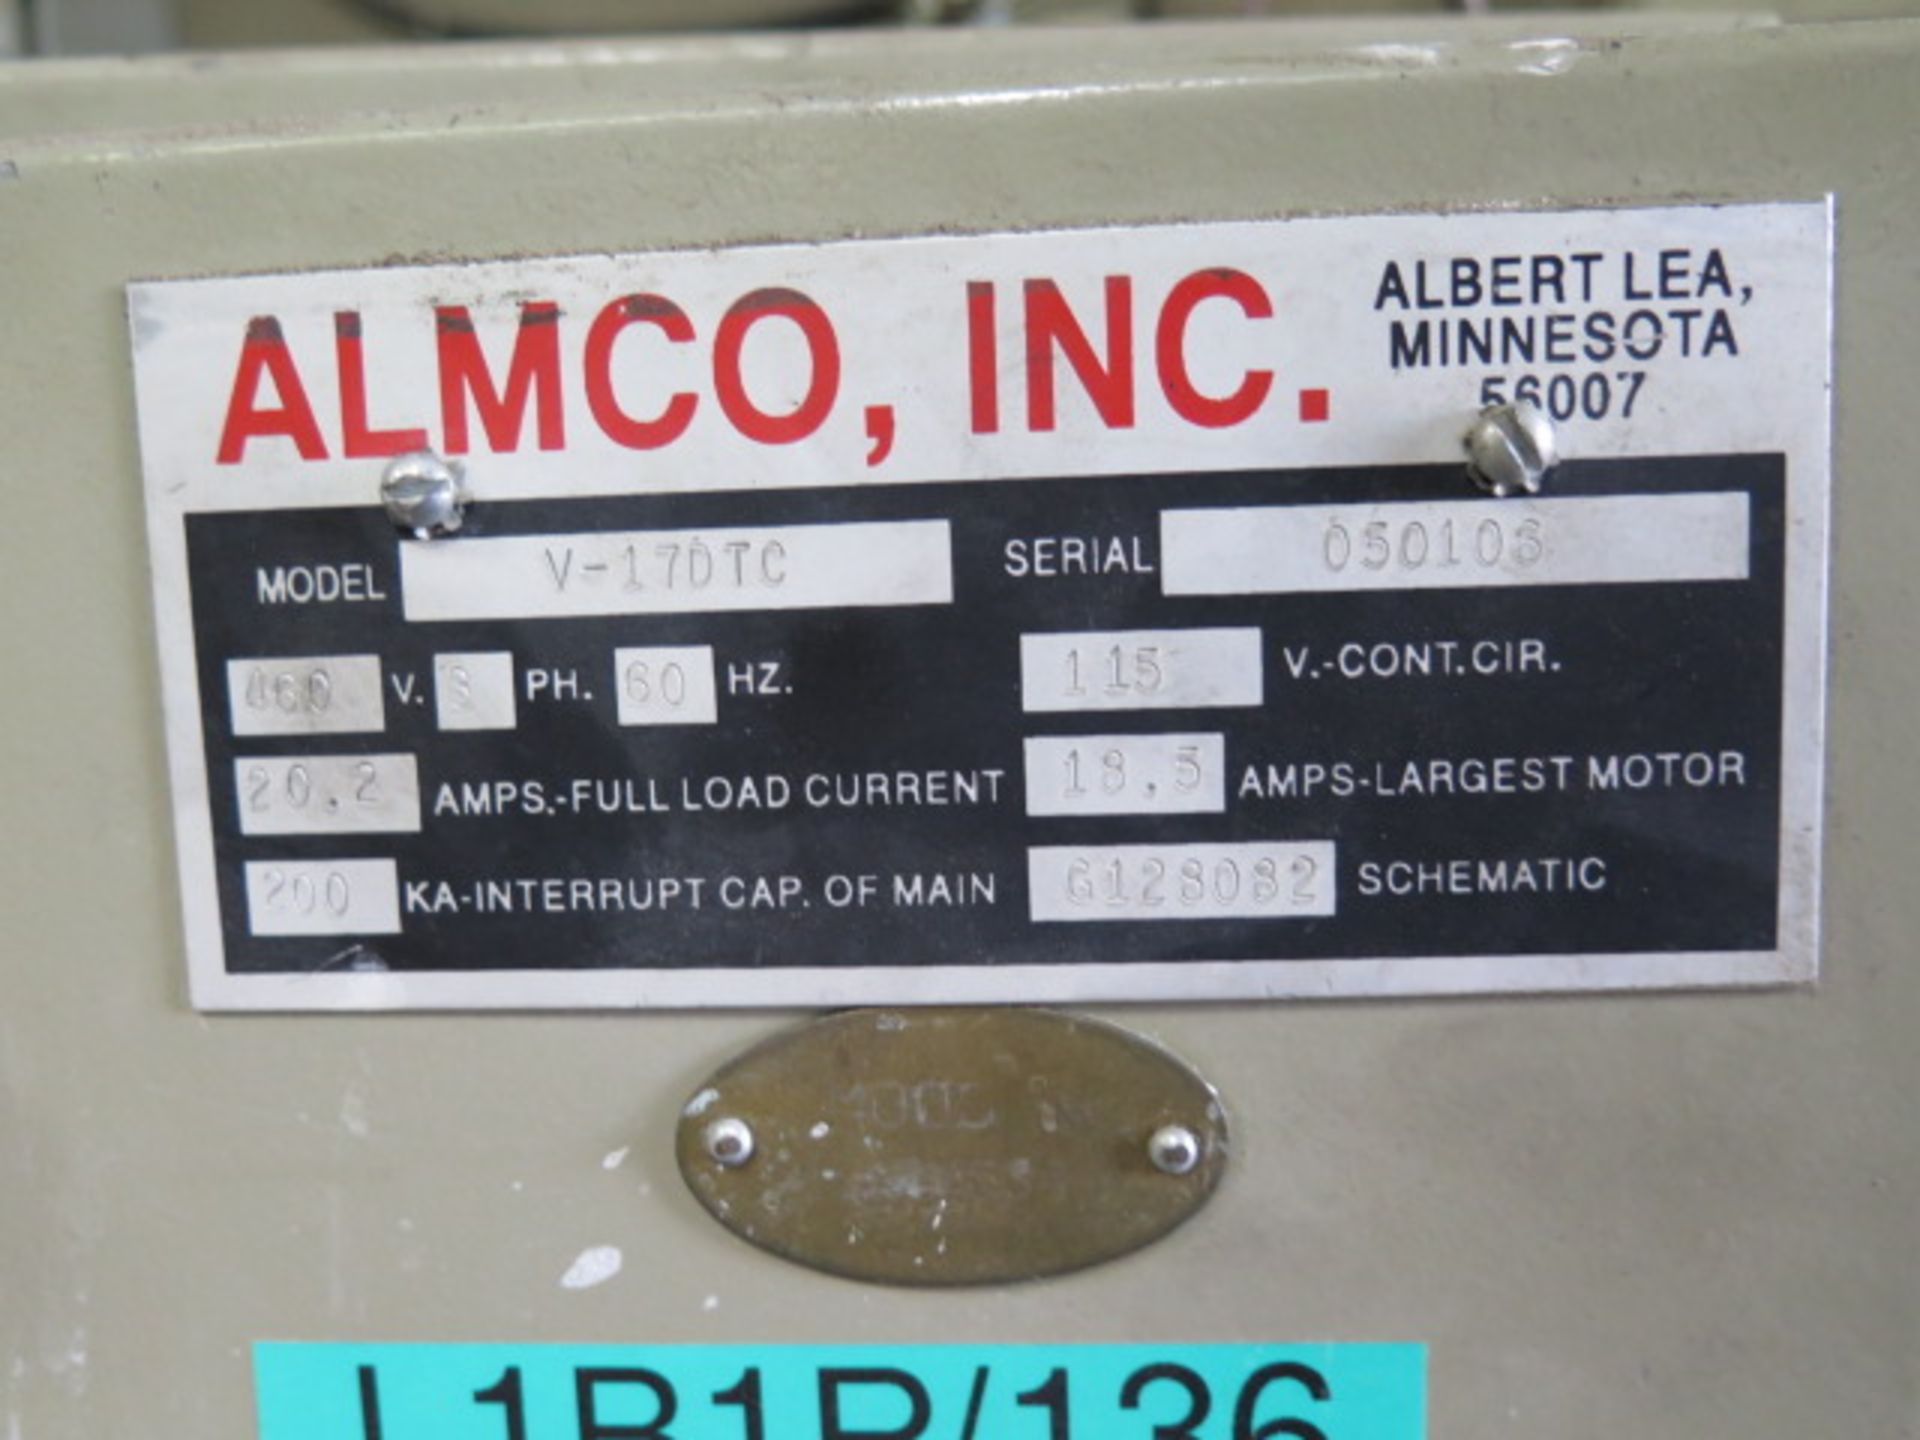 Almco V-17 DTC Media Tumbler s/n 050106 w/ Almco Controls, Slurry Dispenser, SOLD AS IS - Image 15 of 15